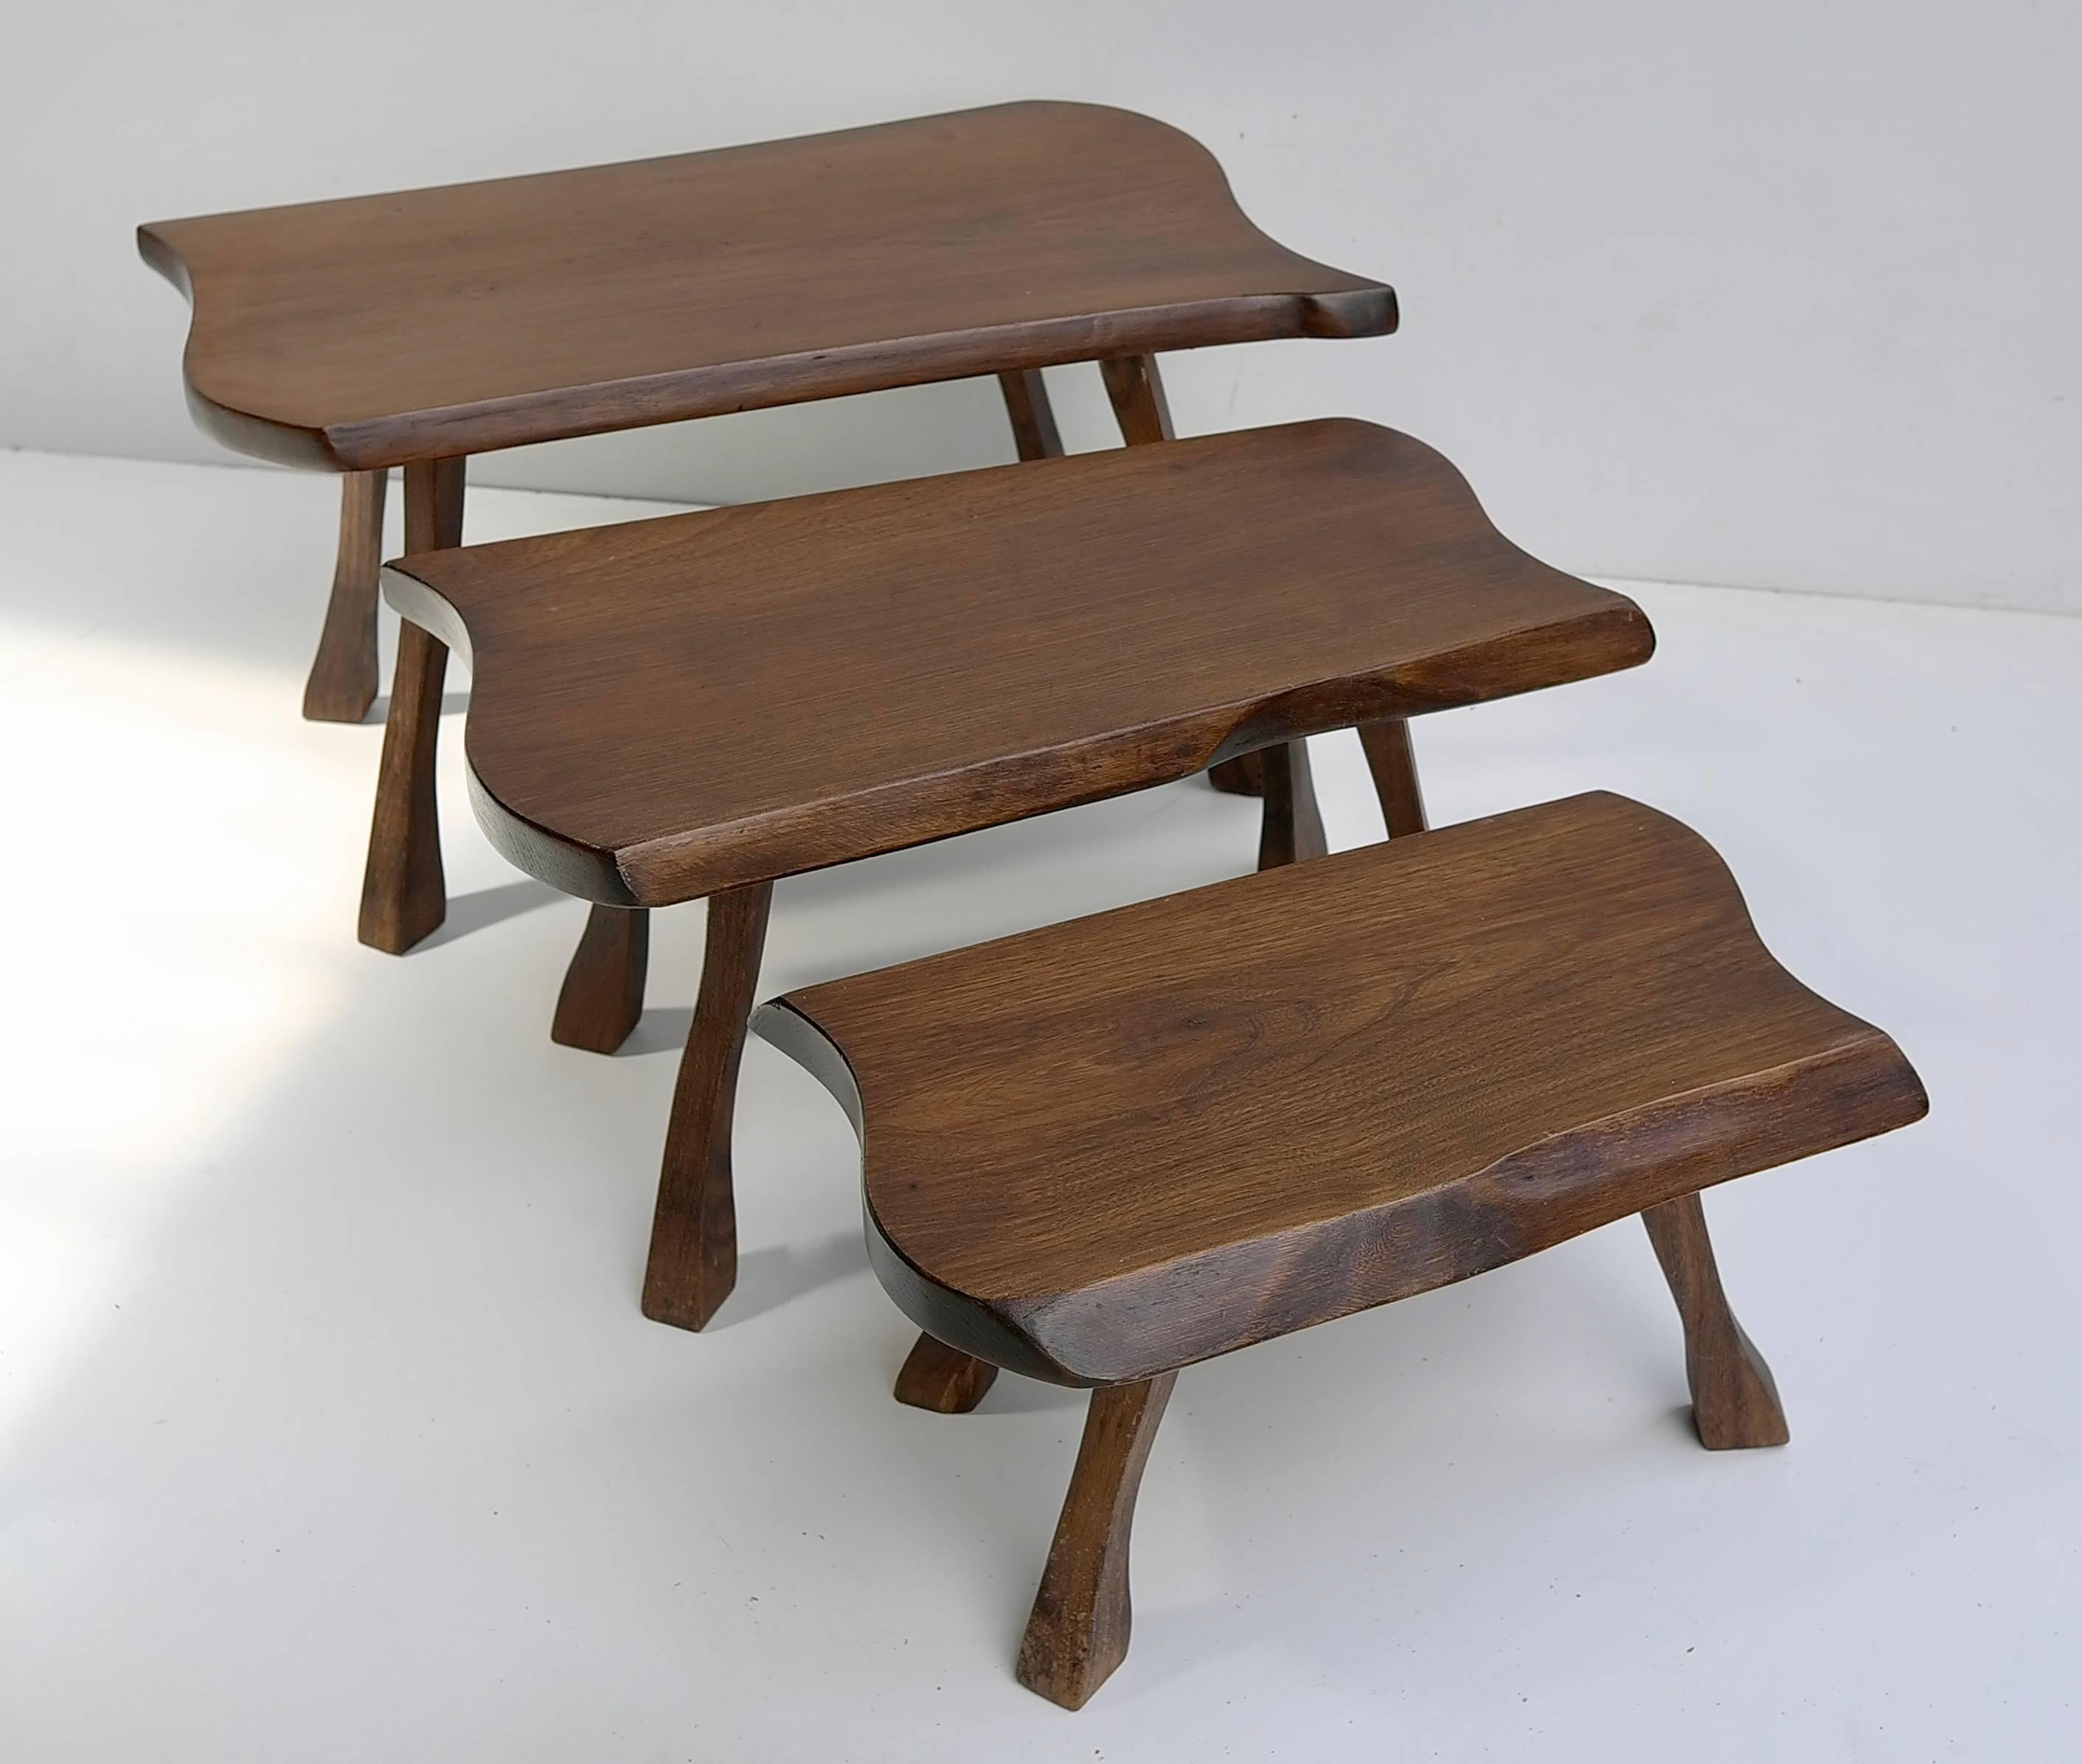 Organic wooden side tables

Measure: Largest table: 60cm x 30cm, middle table: 50cm x 25cm, smallest 40cm x 20cm.